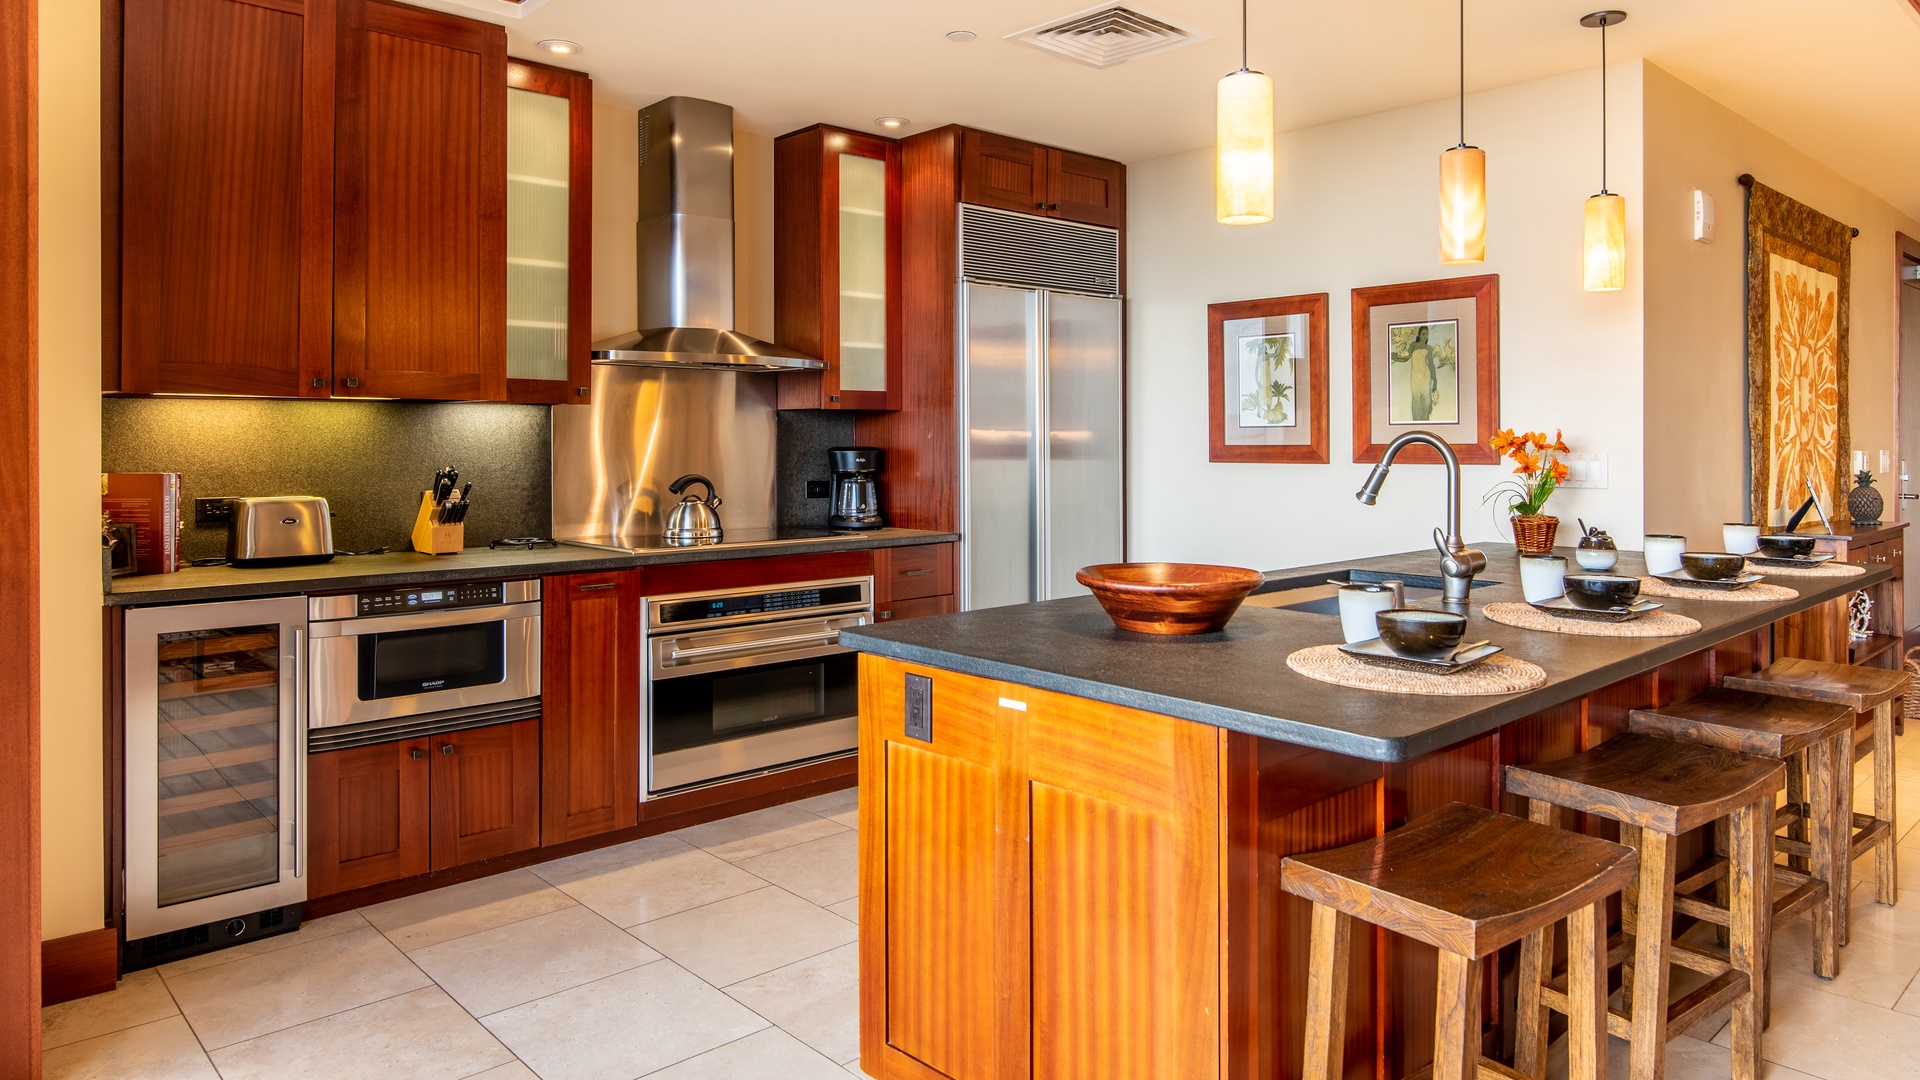 Kapolei Vacation Rentals, Ko Olina Beach Villas O603 - The kitchen has stainless steel appliances for all your culinary needs.